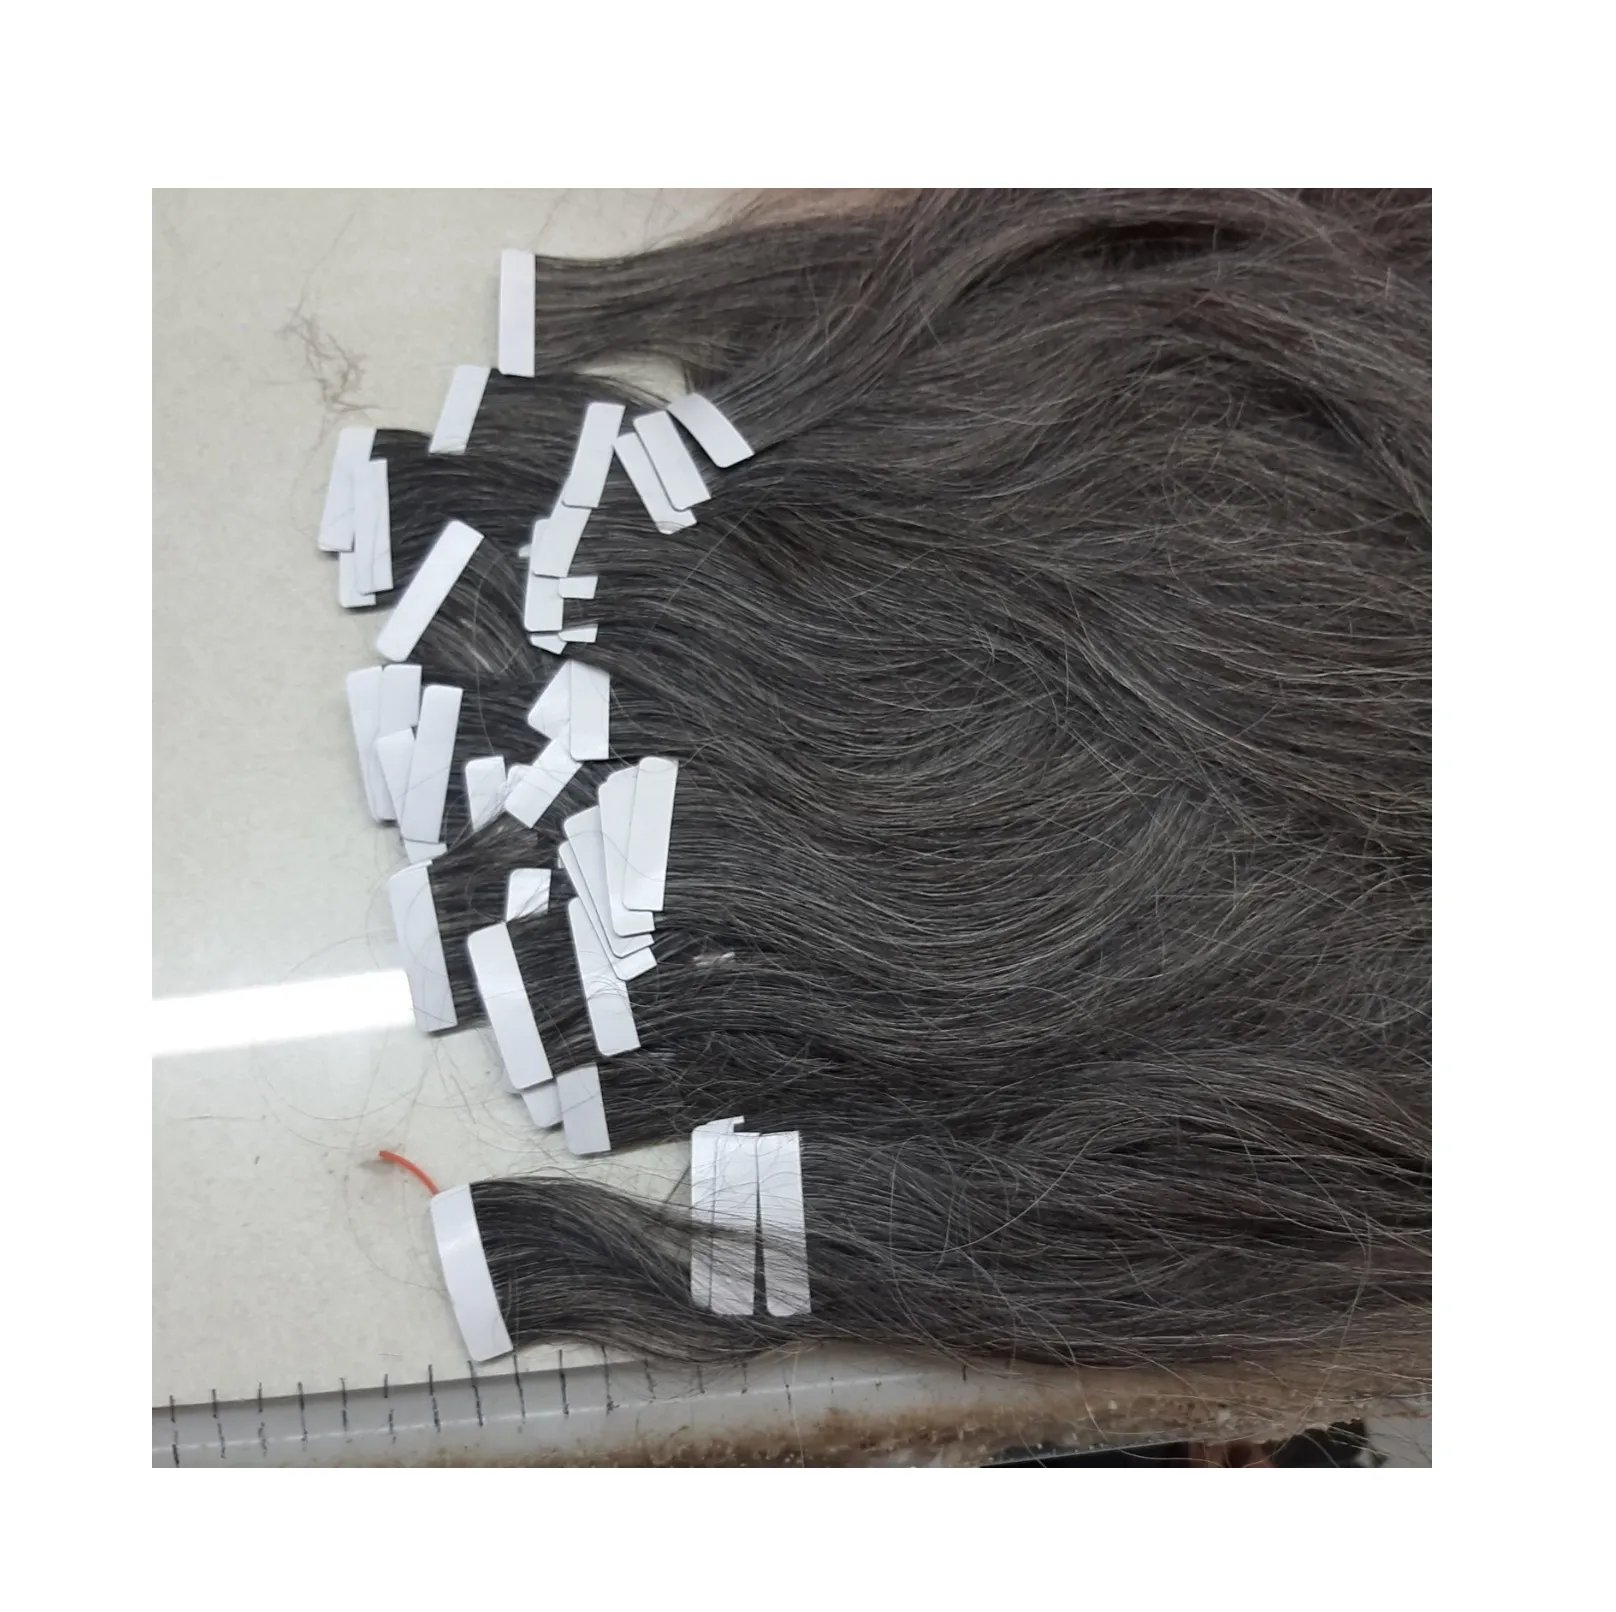 Best Quality 100% Tape Hair Extensions, Tape Hair Extension Human Hair Made In Vietnam